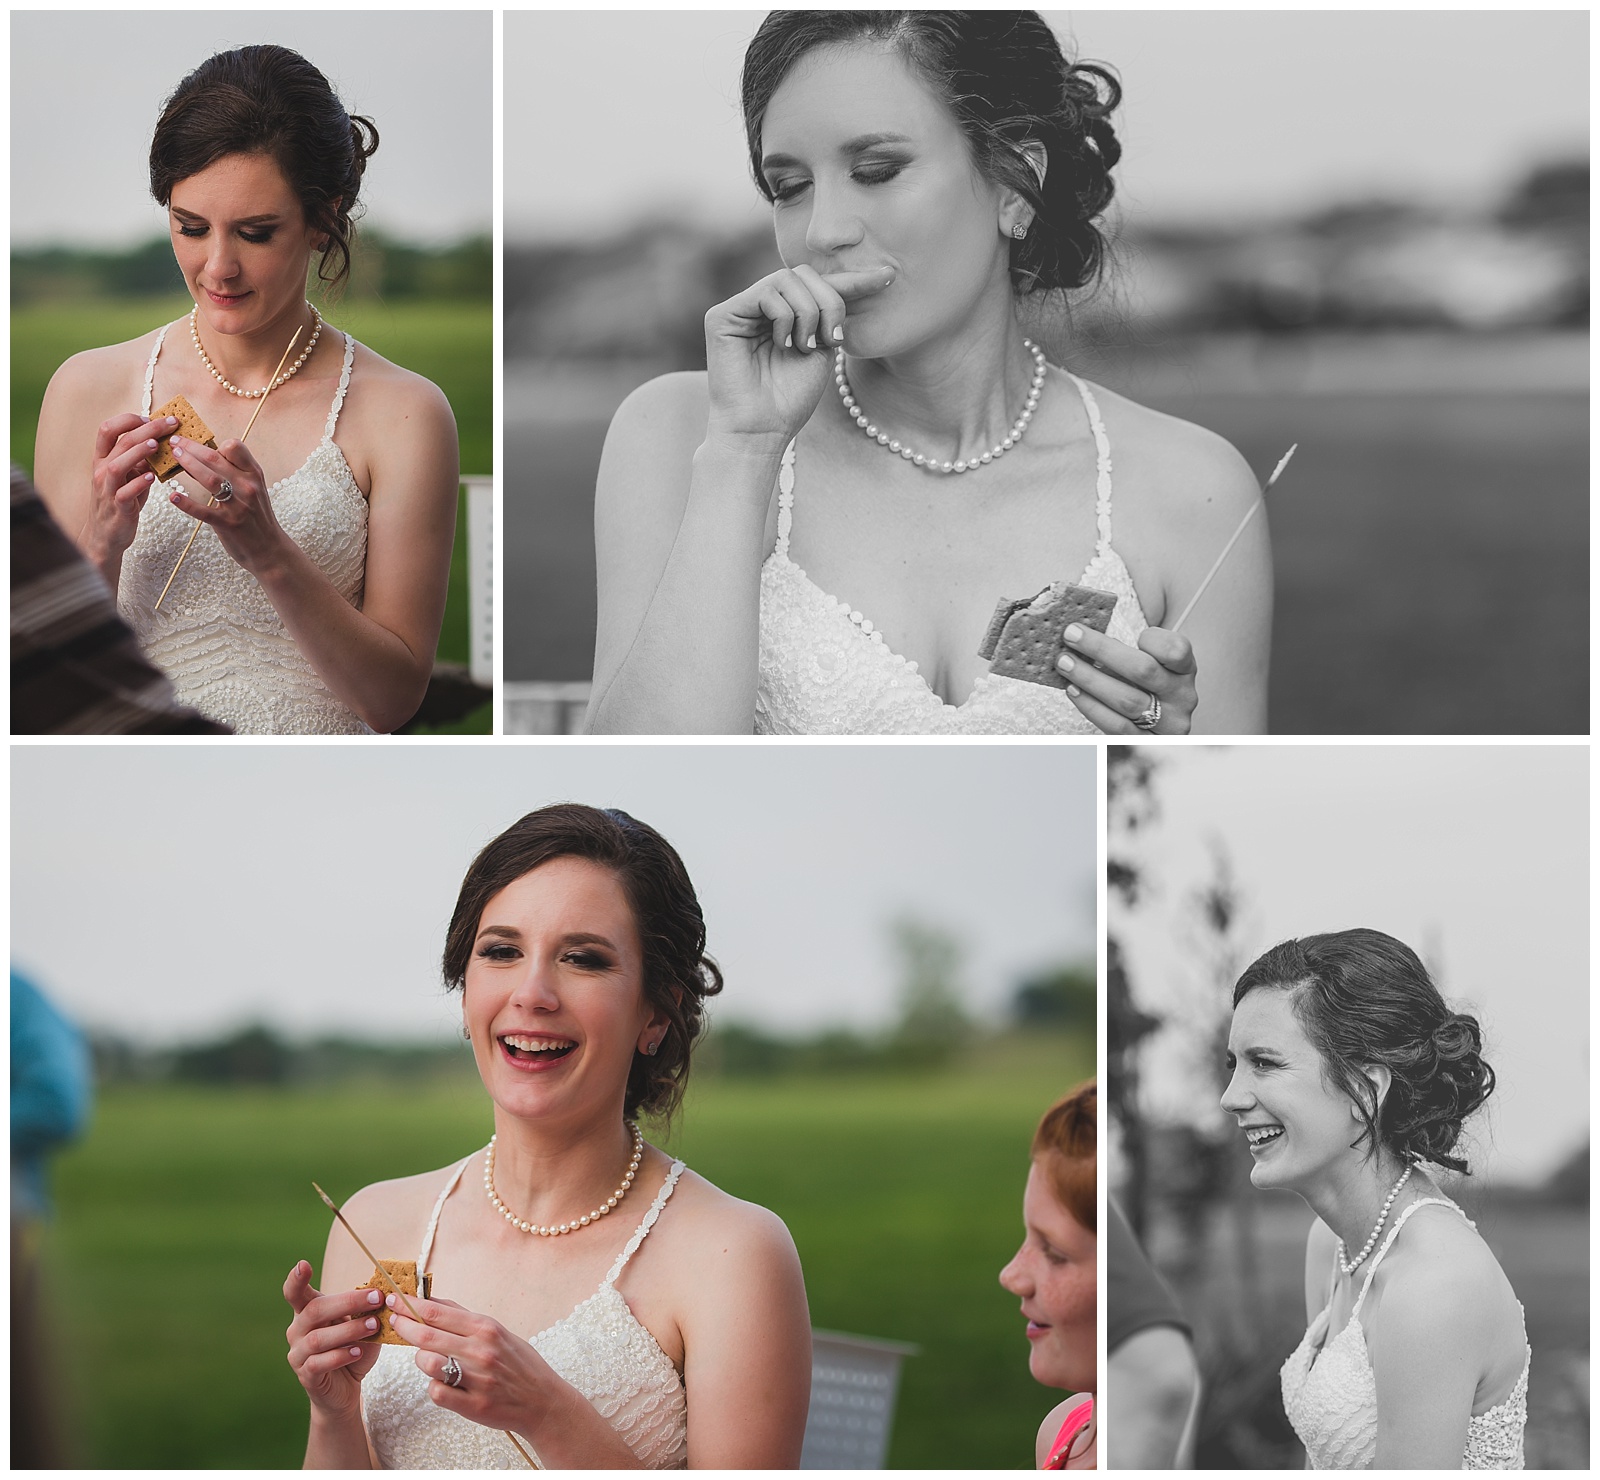 Wedding photography in Gower, Missouri, by Kansas City wedding photographers Wisdom-Watson Weddings.